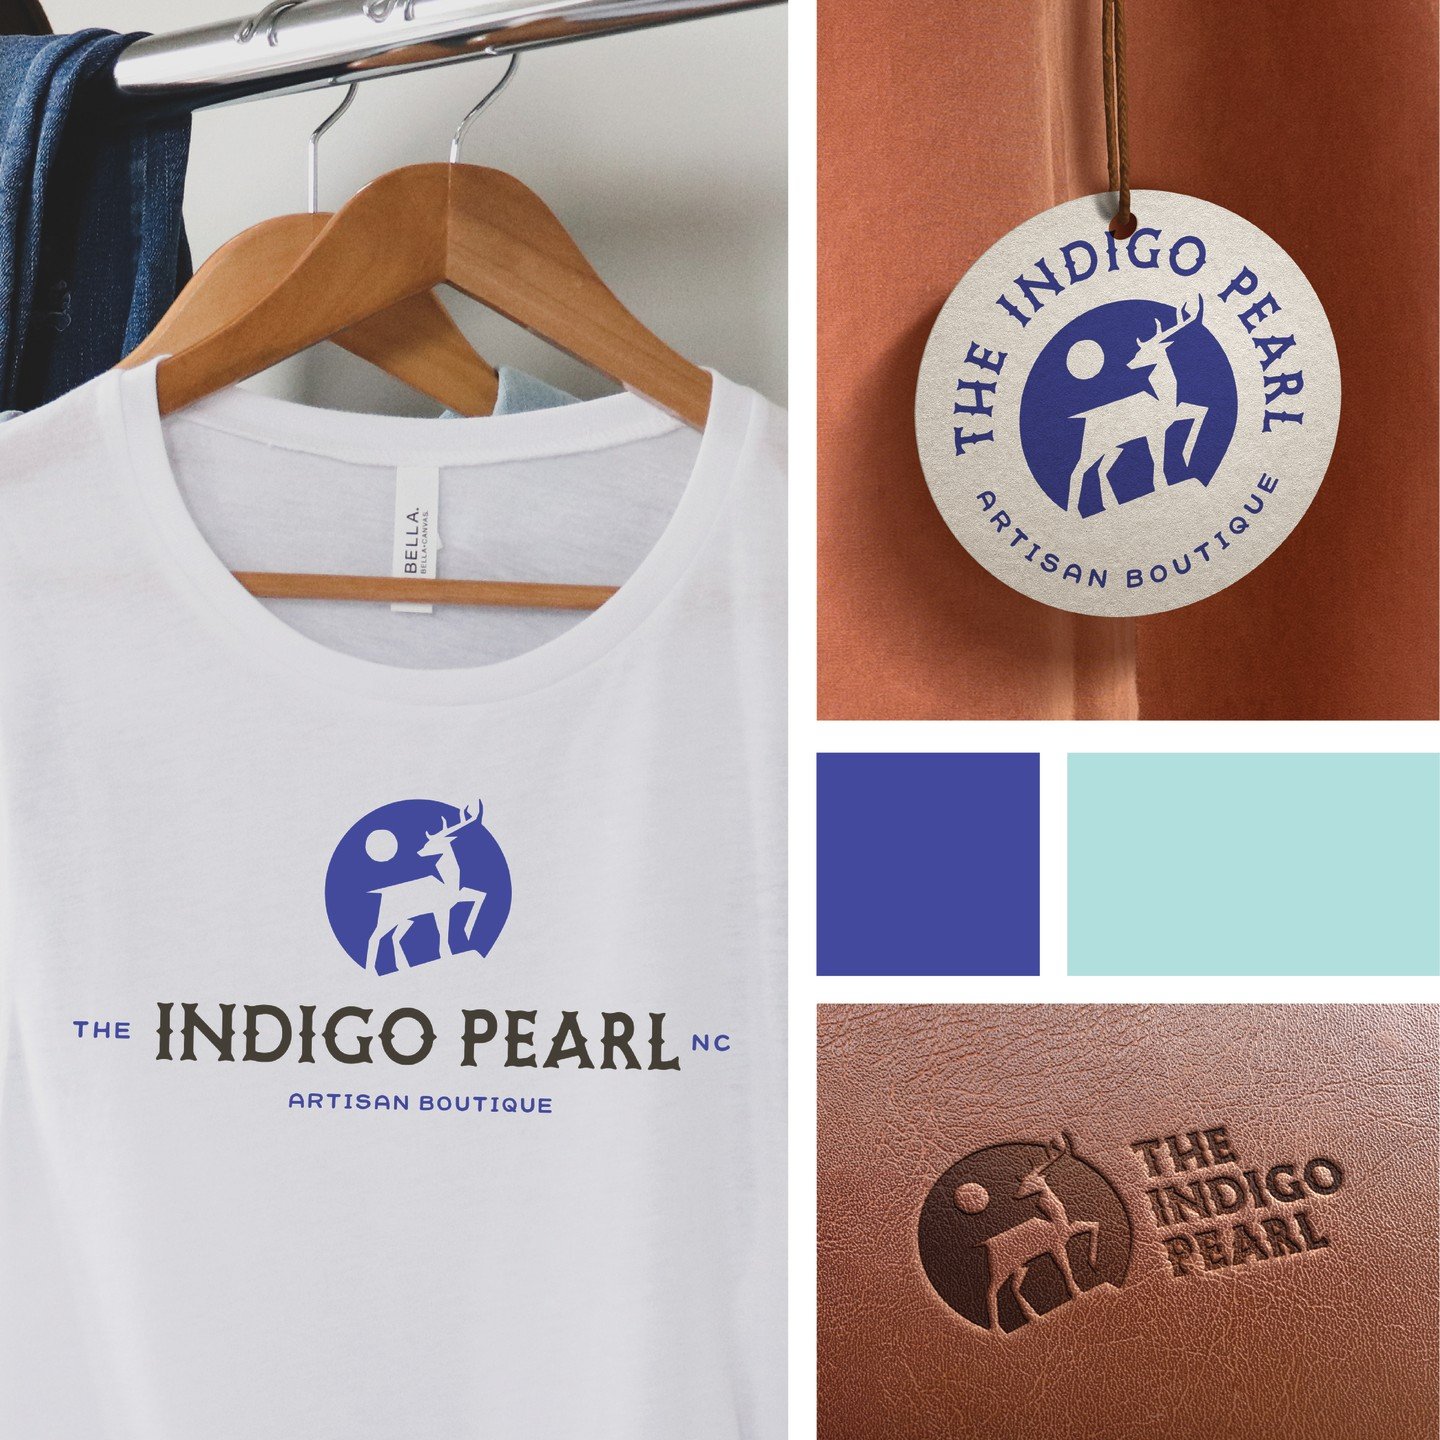 As @theindigopearl, one of my favorite shops in @townofwaxhawnc, prepared to refresh their outdoor signage and enhance their overall visual brand experience, I was delighted that they trusted me to walk with them through this process. It was such a f